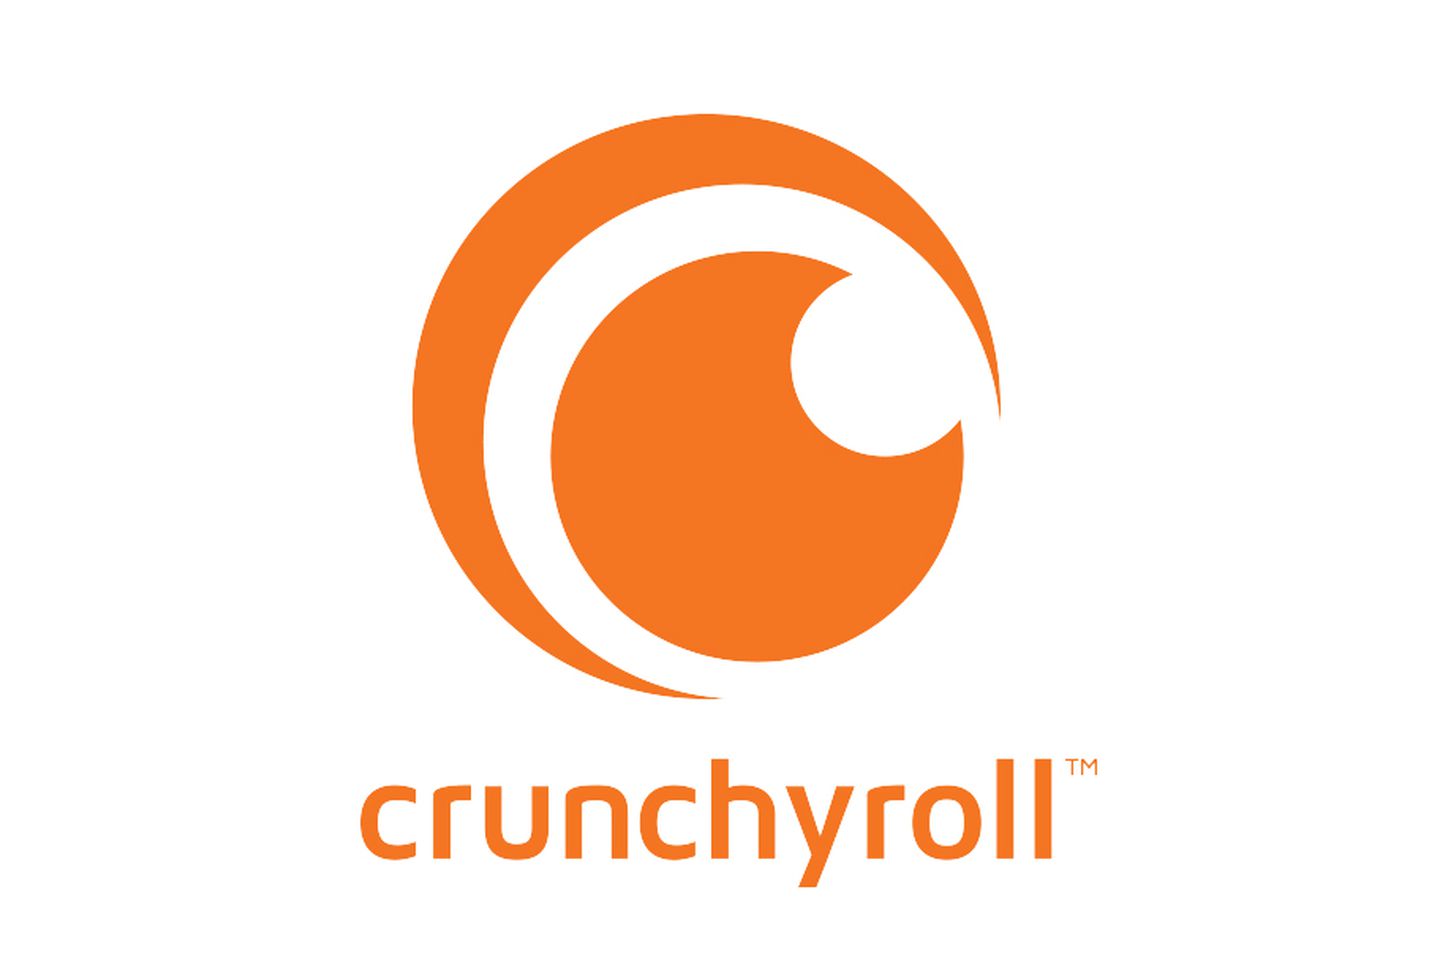 Crunchyroll raises monthly subscription cost for the first time since